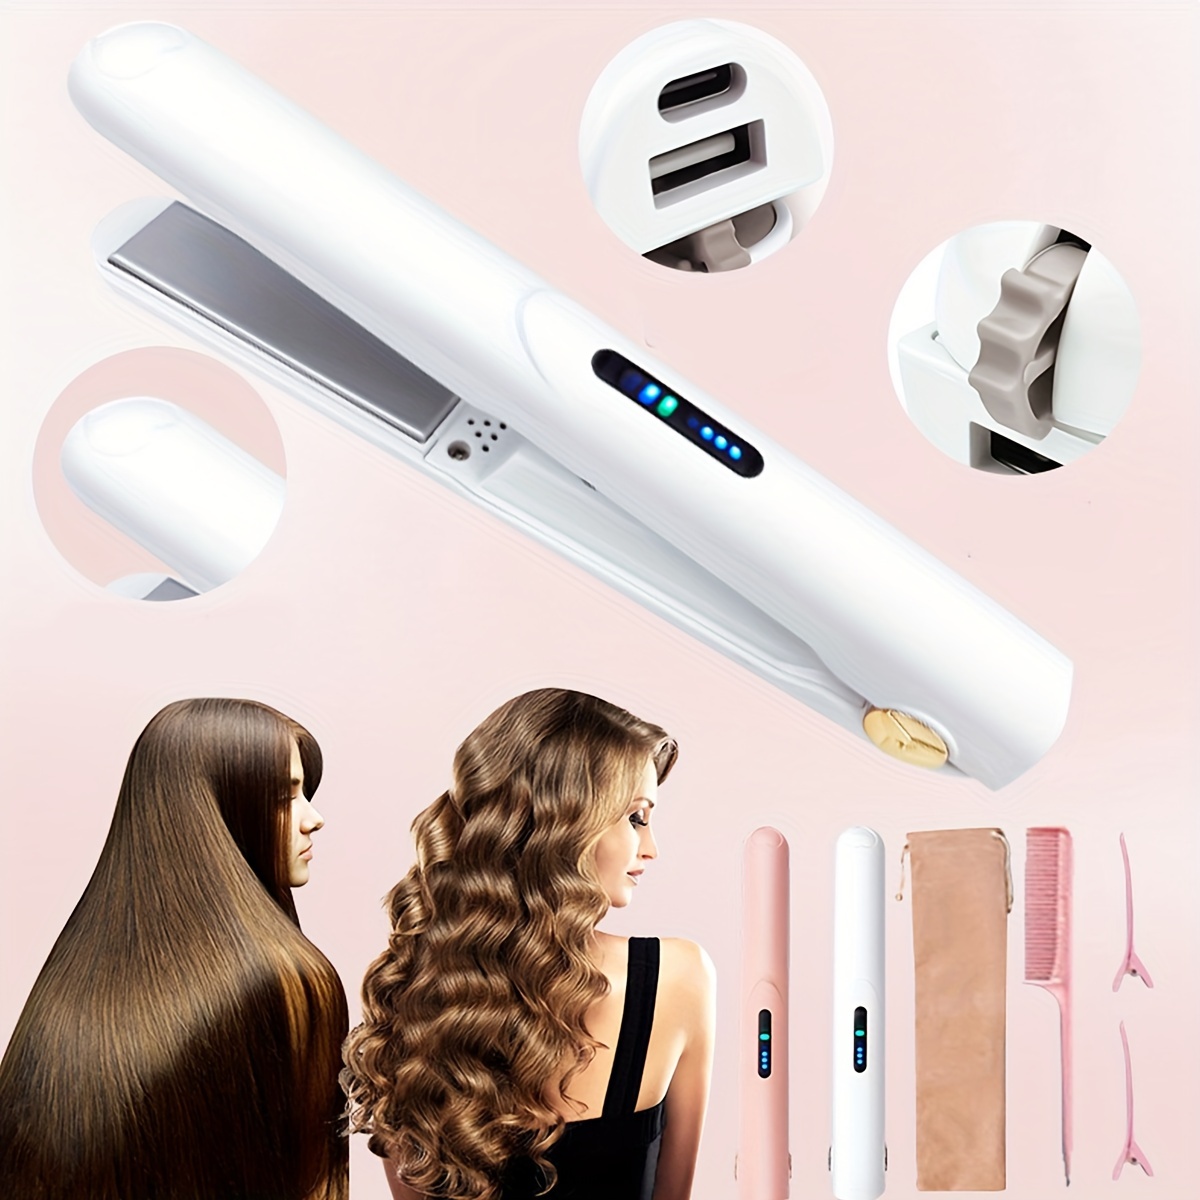 

Cordless Mini Hair Straightener And Curling Iron, Usb Rechargeable Portable 2-in-1 Flat Iron, Gifts For Women